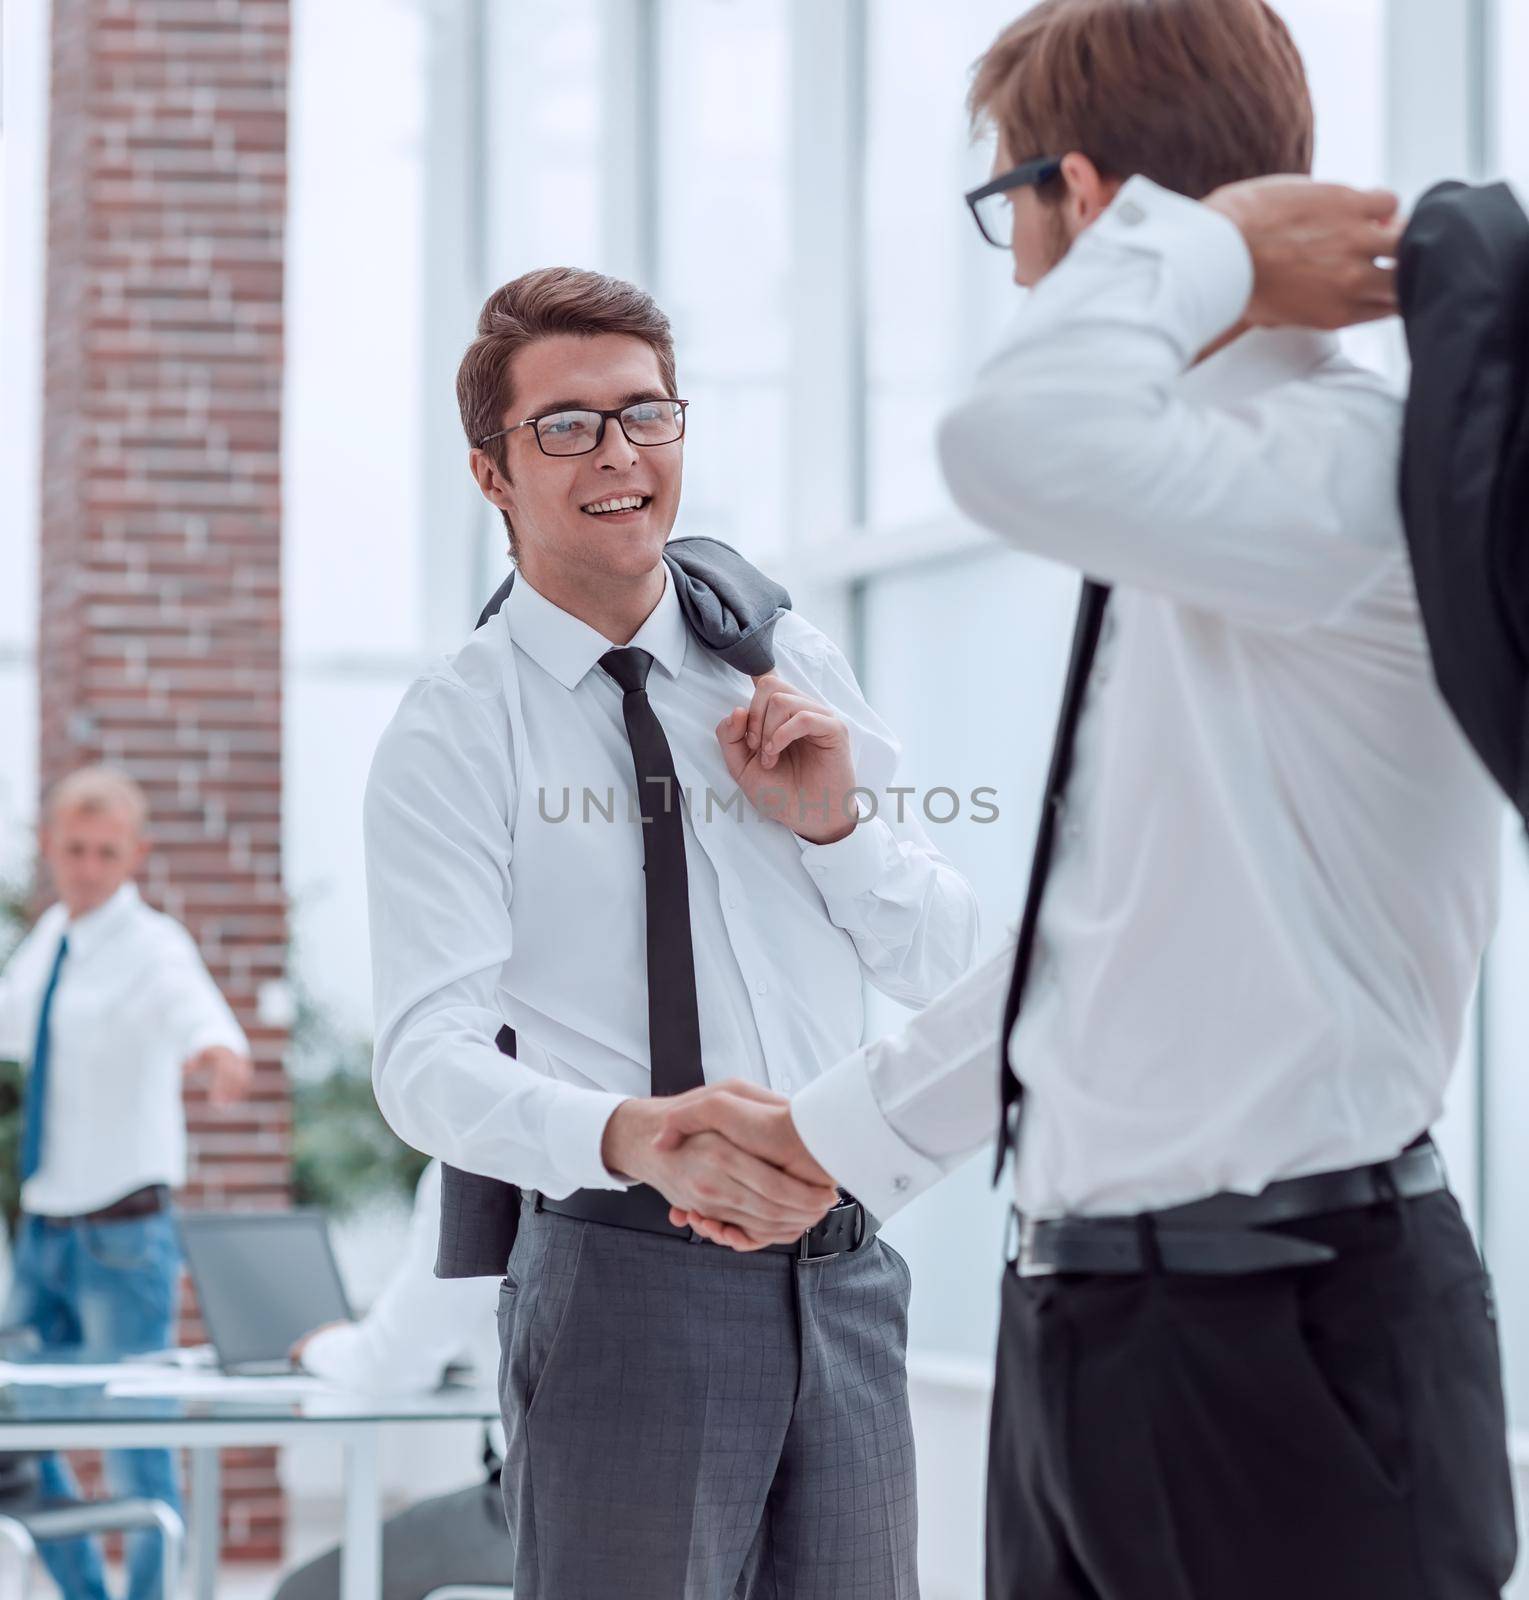 employees of the company greeting each other with a handshake. by asdf